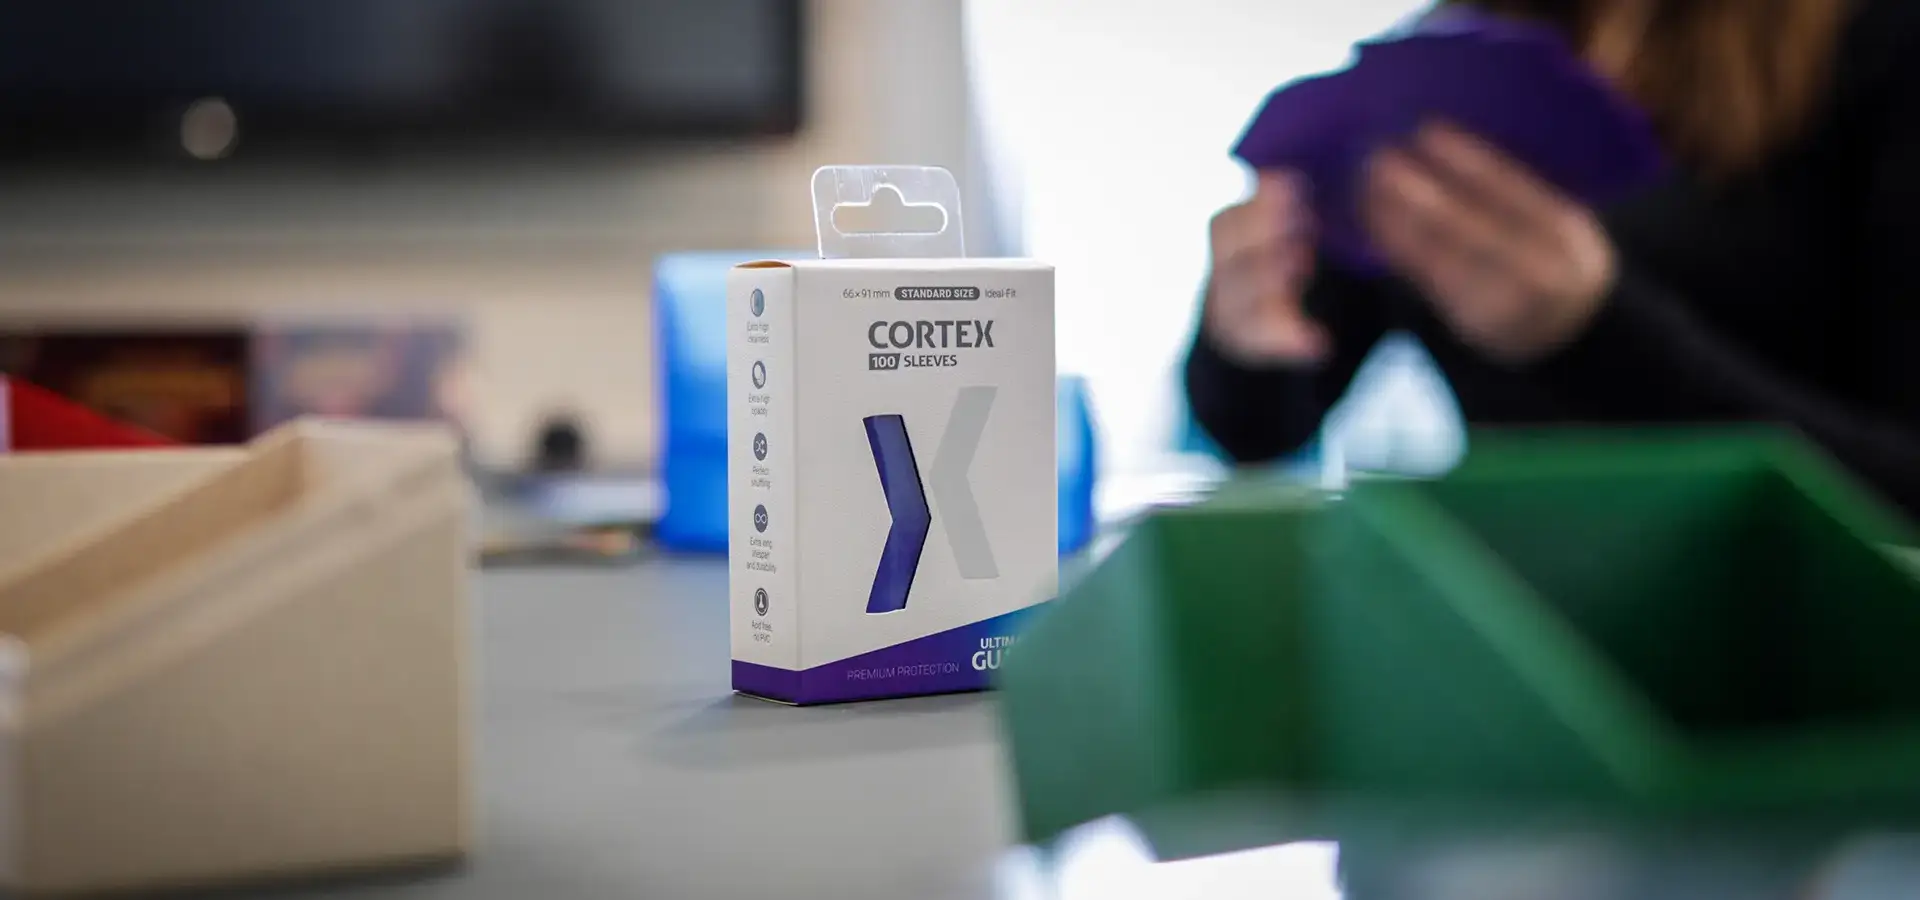 Ultimate Guard on X: We mark the beginning of the new year with launching  Cortex glossy sleeves. Designed for daily use, Cortex features perfect  shuffle, high opacity, and strong seal strength. Get